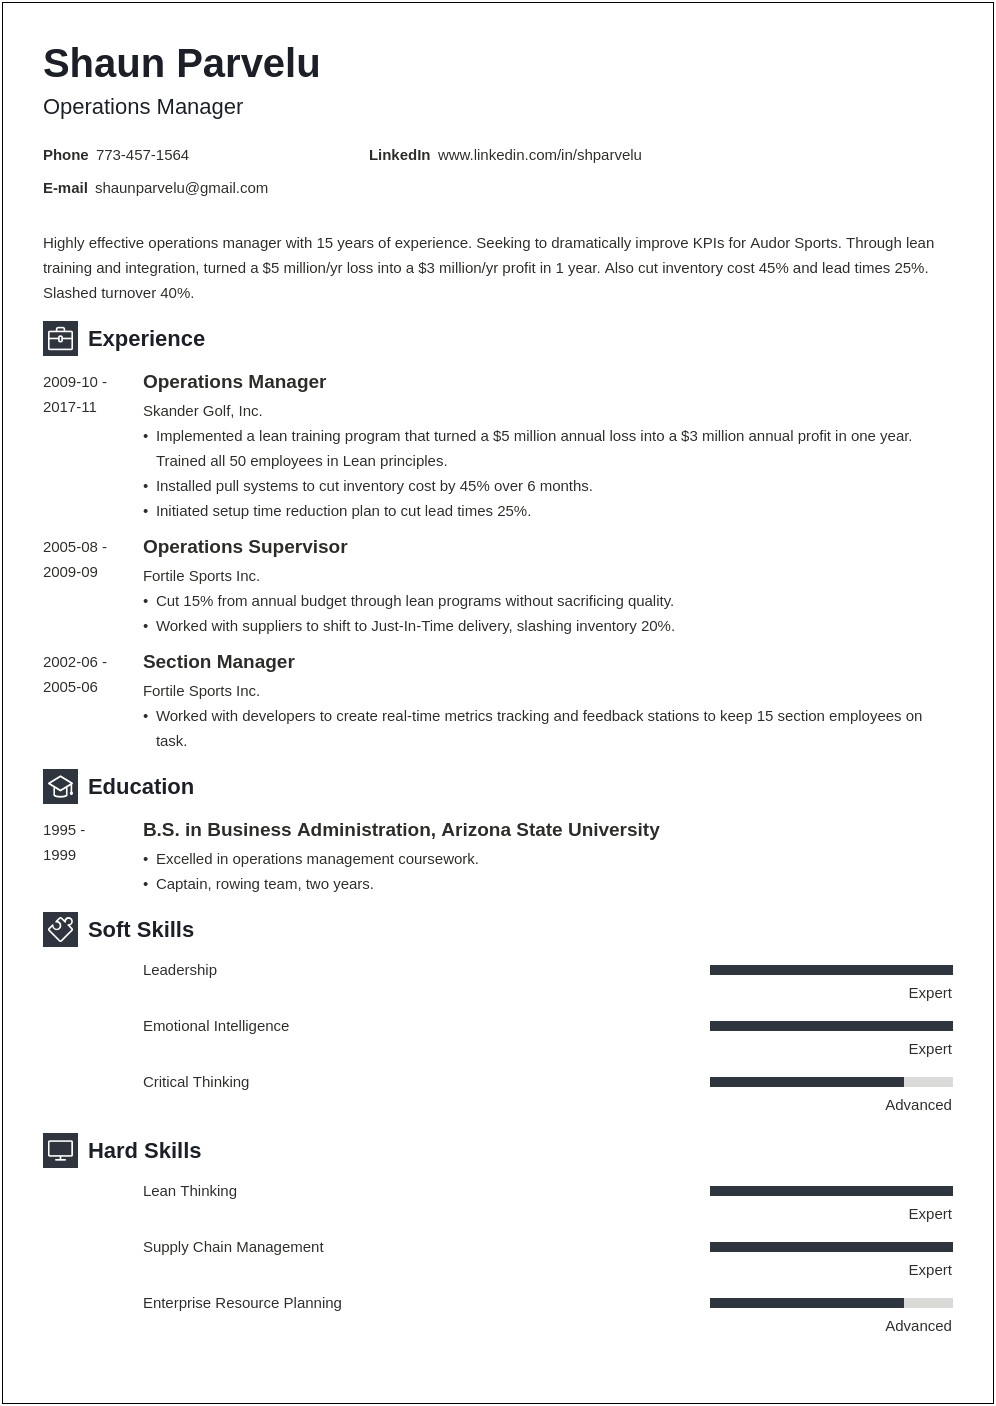 Operations Manager Resume Bullet Points